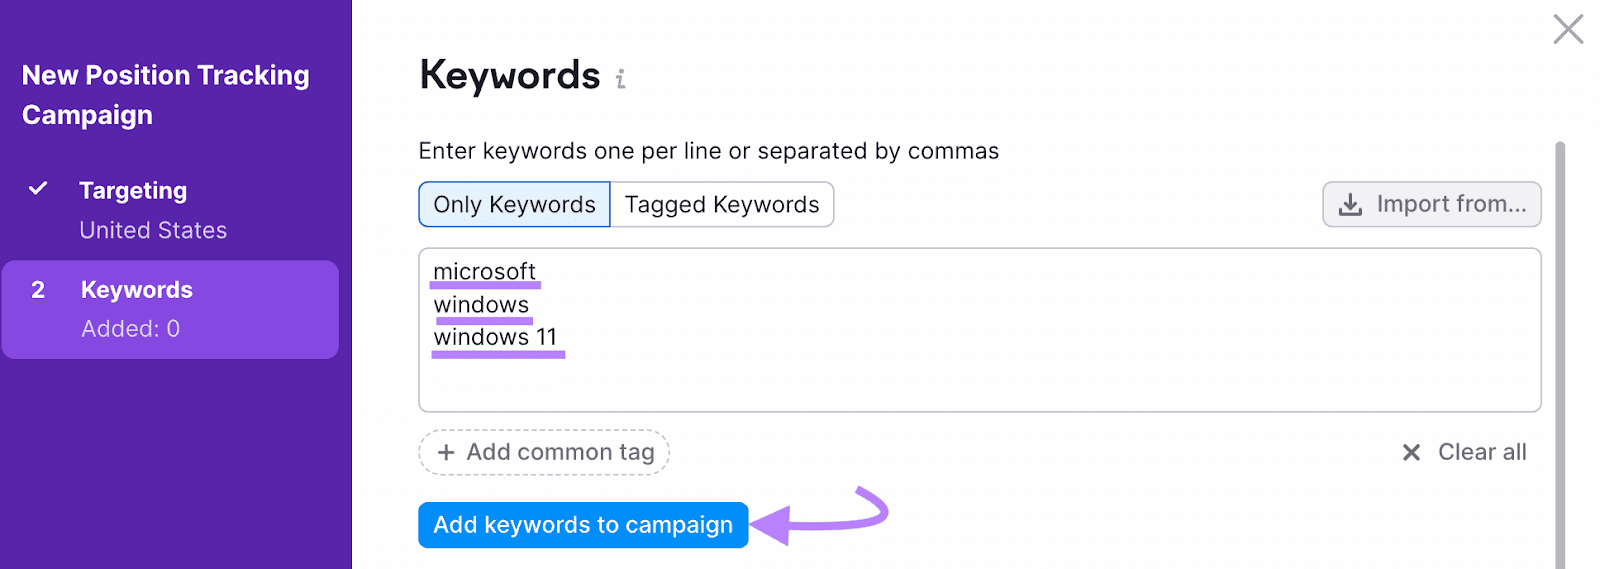 "Keywords" window in New Position Tracking Campaign settings